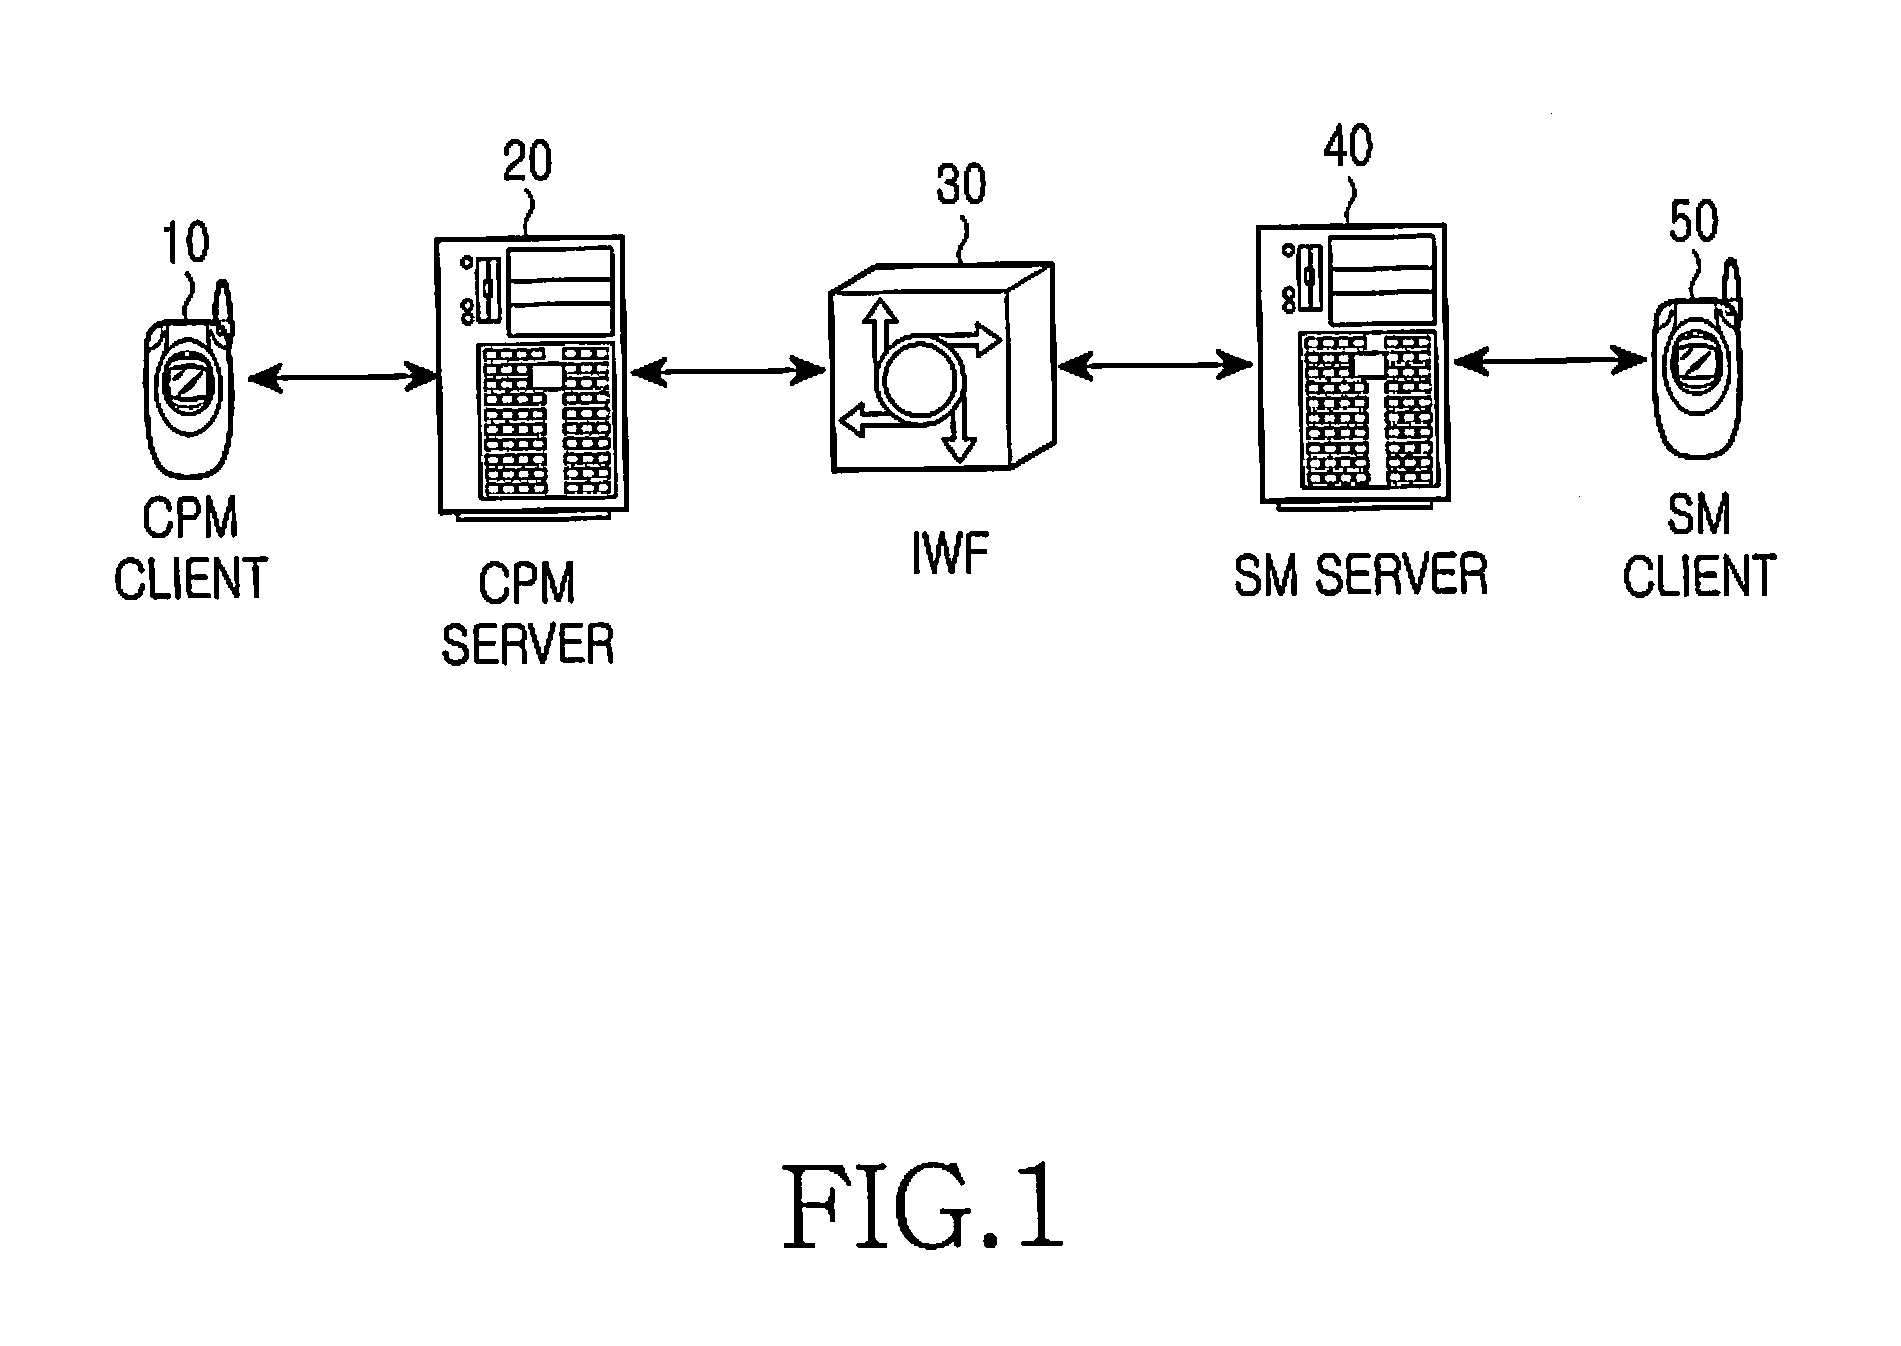 Method and system for establishing session for message communication between converged IP messaging service client and short messaging service client